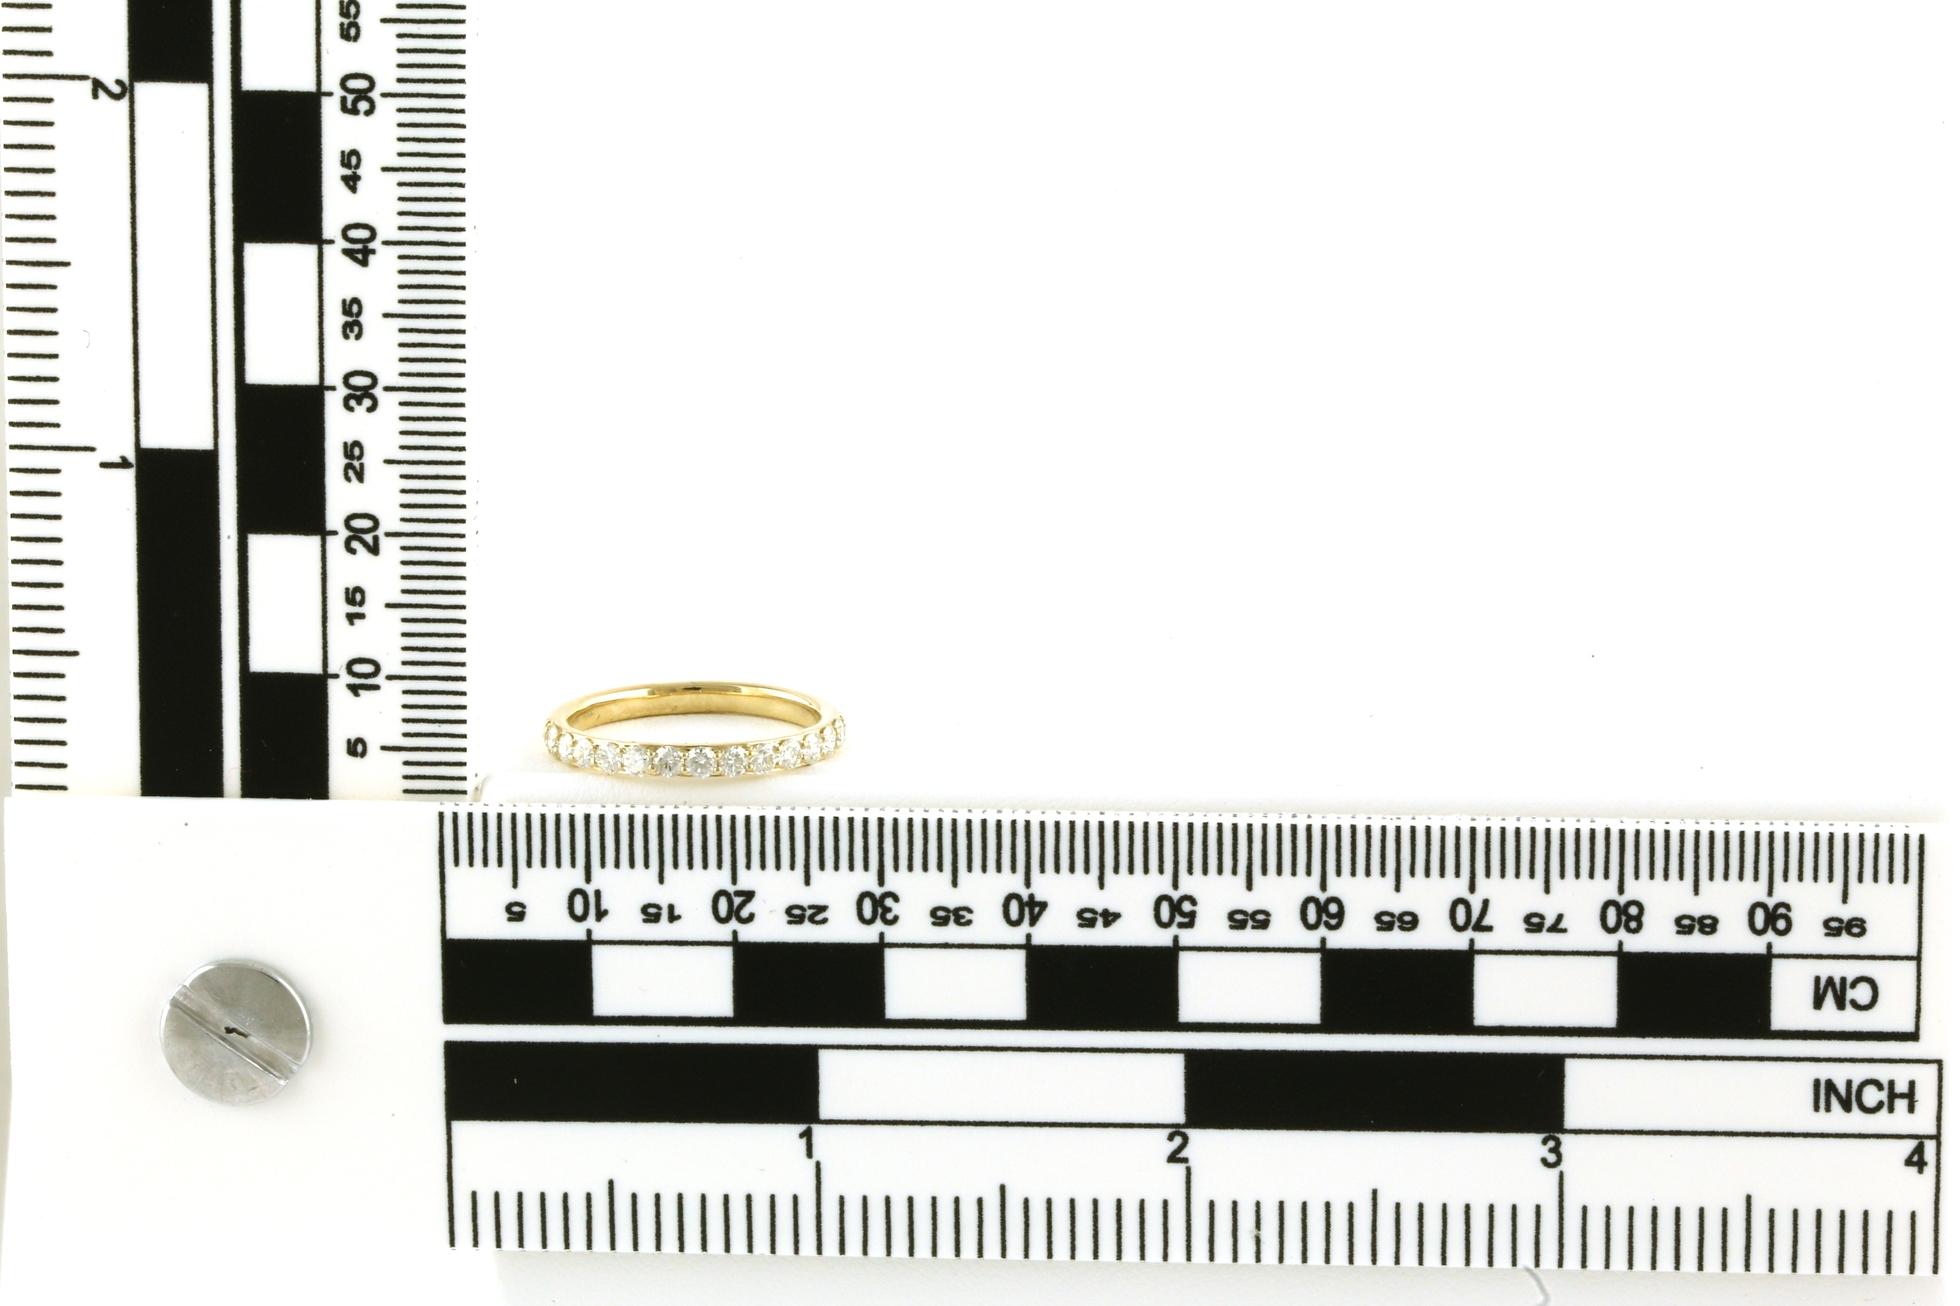 13-Stone Share-prong Diamond Wedding Band in Yellow Gold (0.50cts TWT) Scale